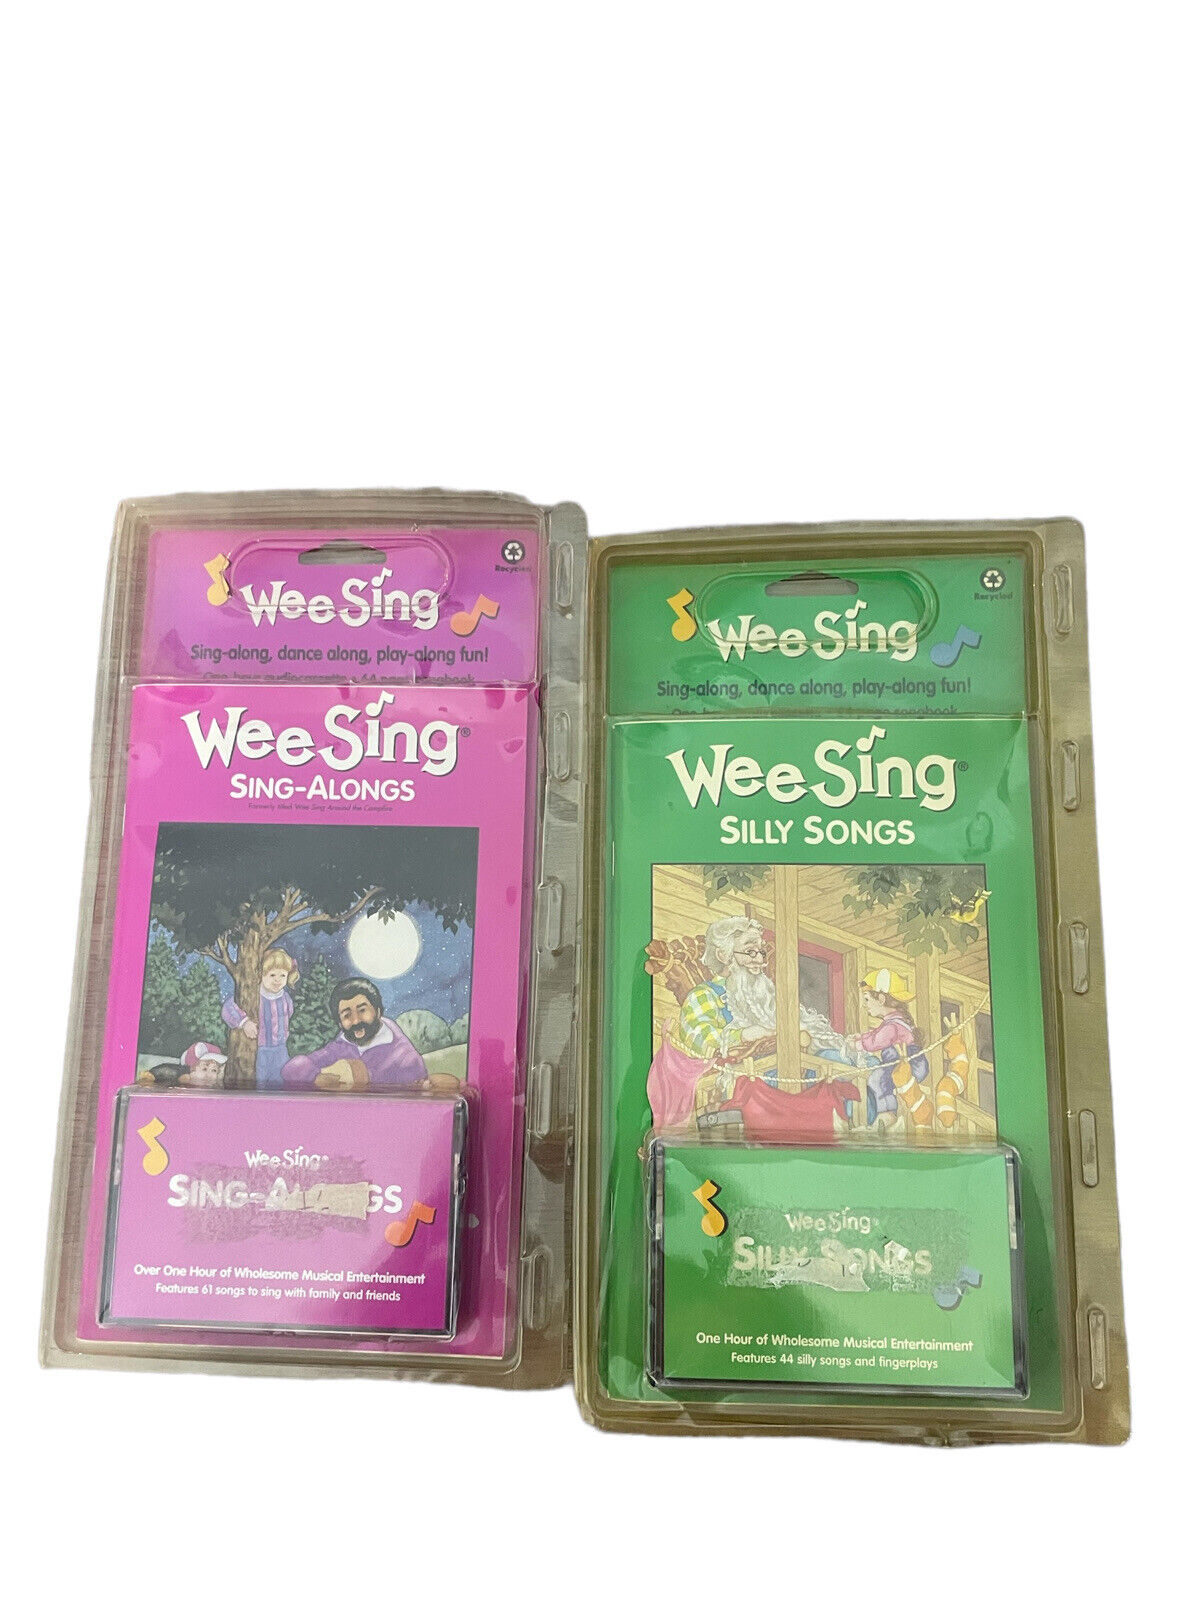 Vintage Wee Sing Sing Along Silly songCassette & Songbook - Folk Songs for Kids